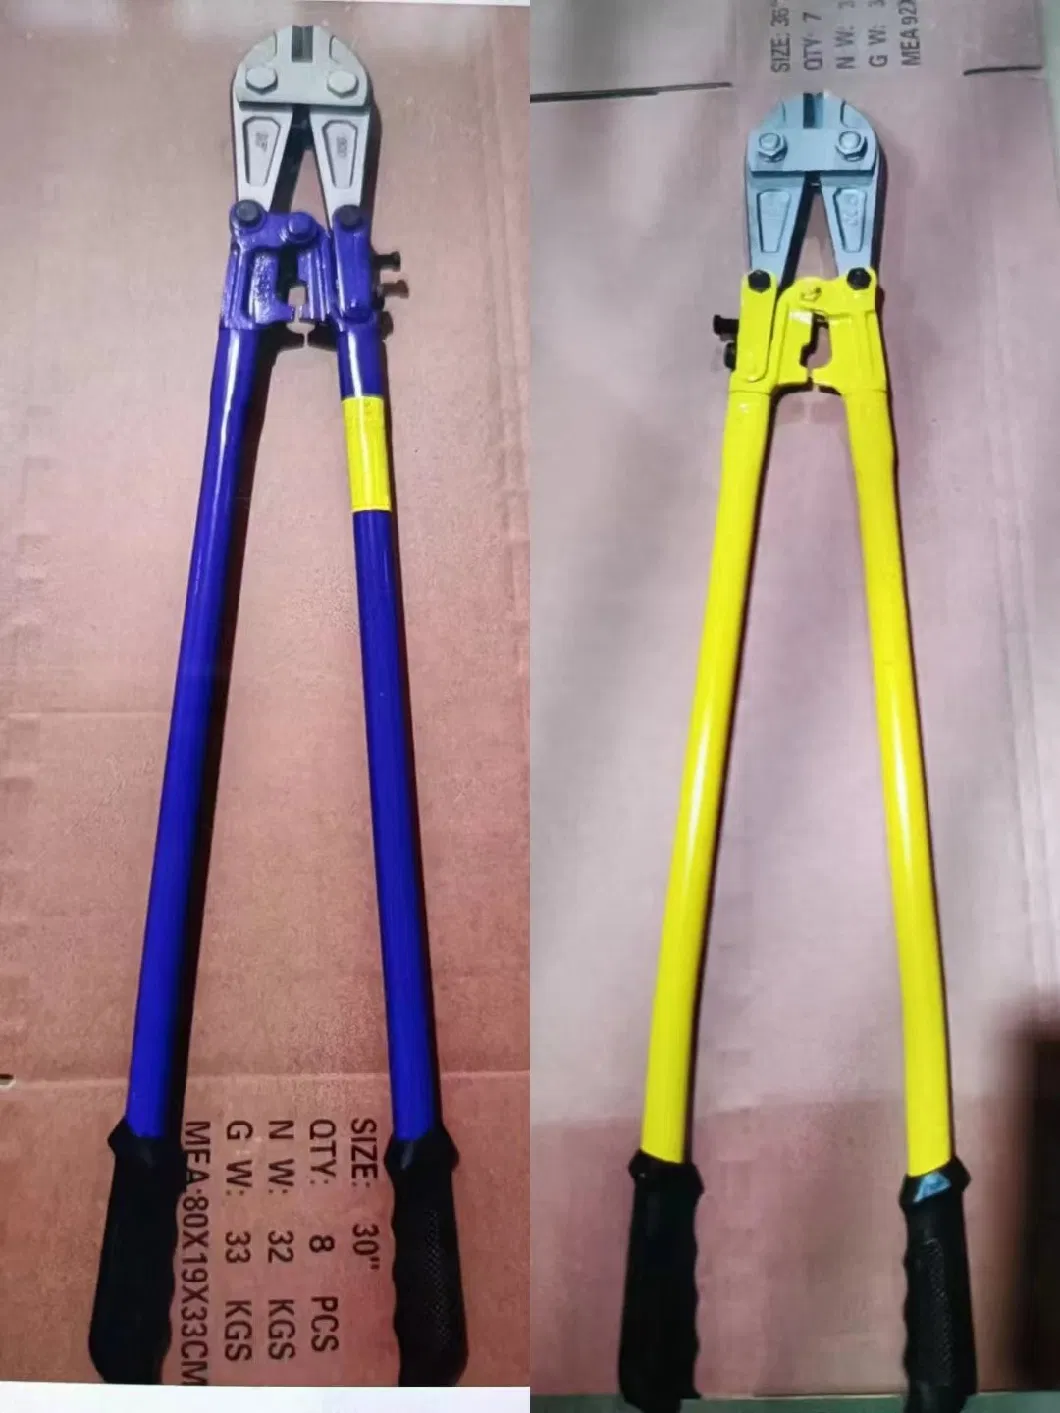 Bolt Cutter 14inch Heavy Wire Cutting Pliers High Quality Flat Nose Bolt Cutters Multifunction Wire Clippers Hand Tool